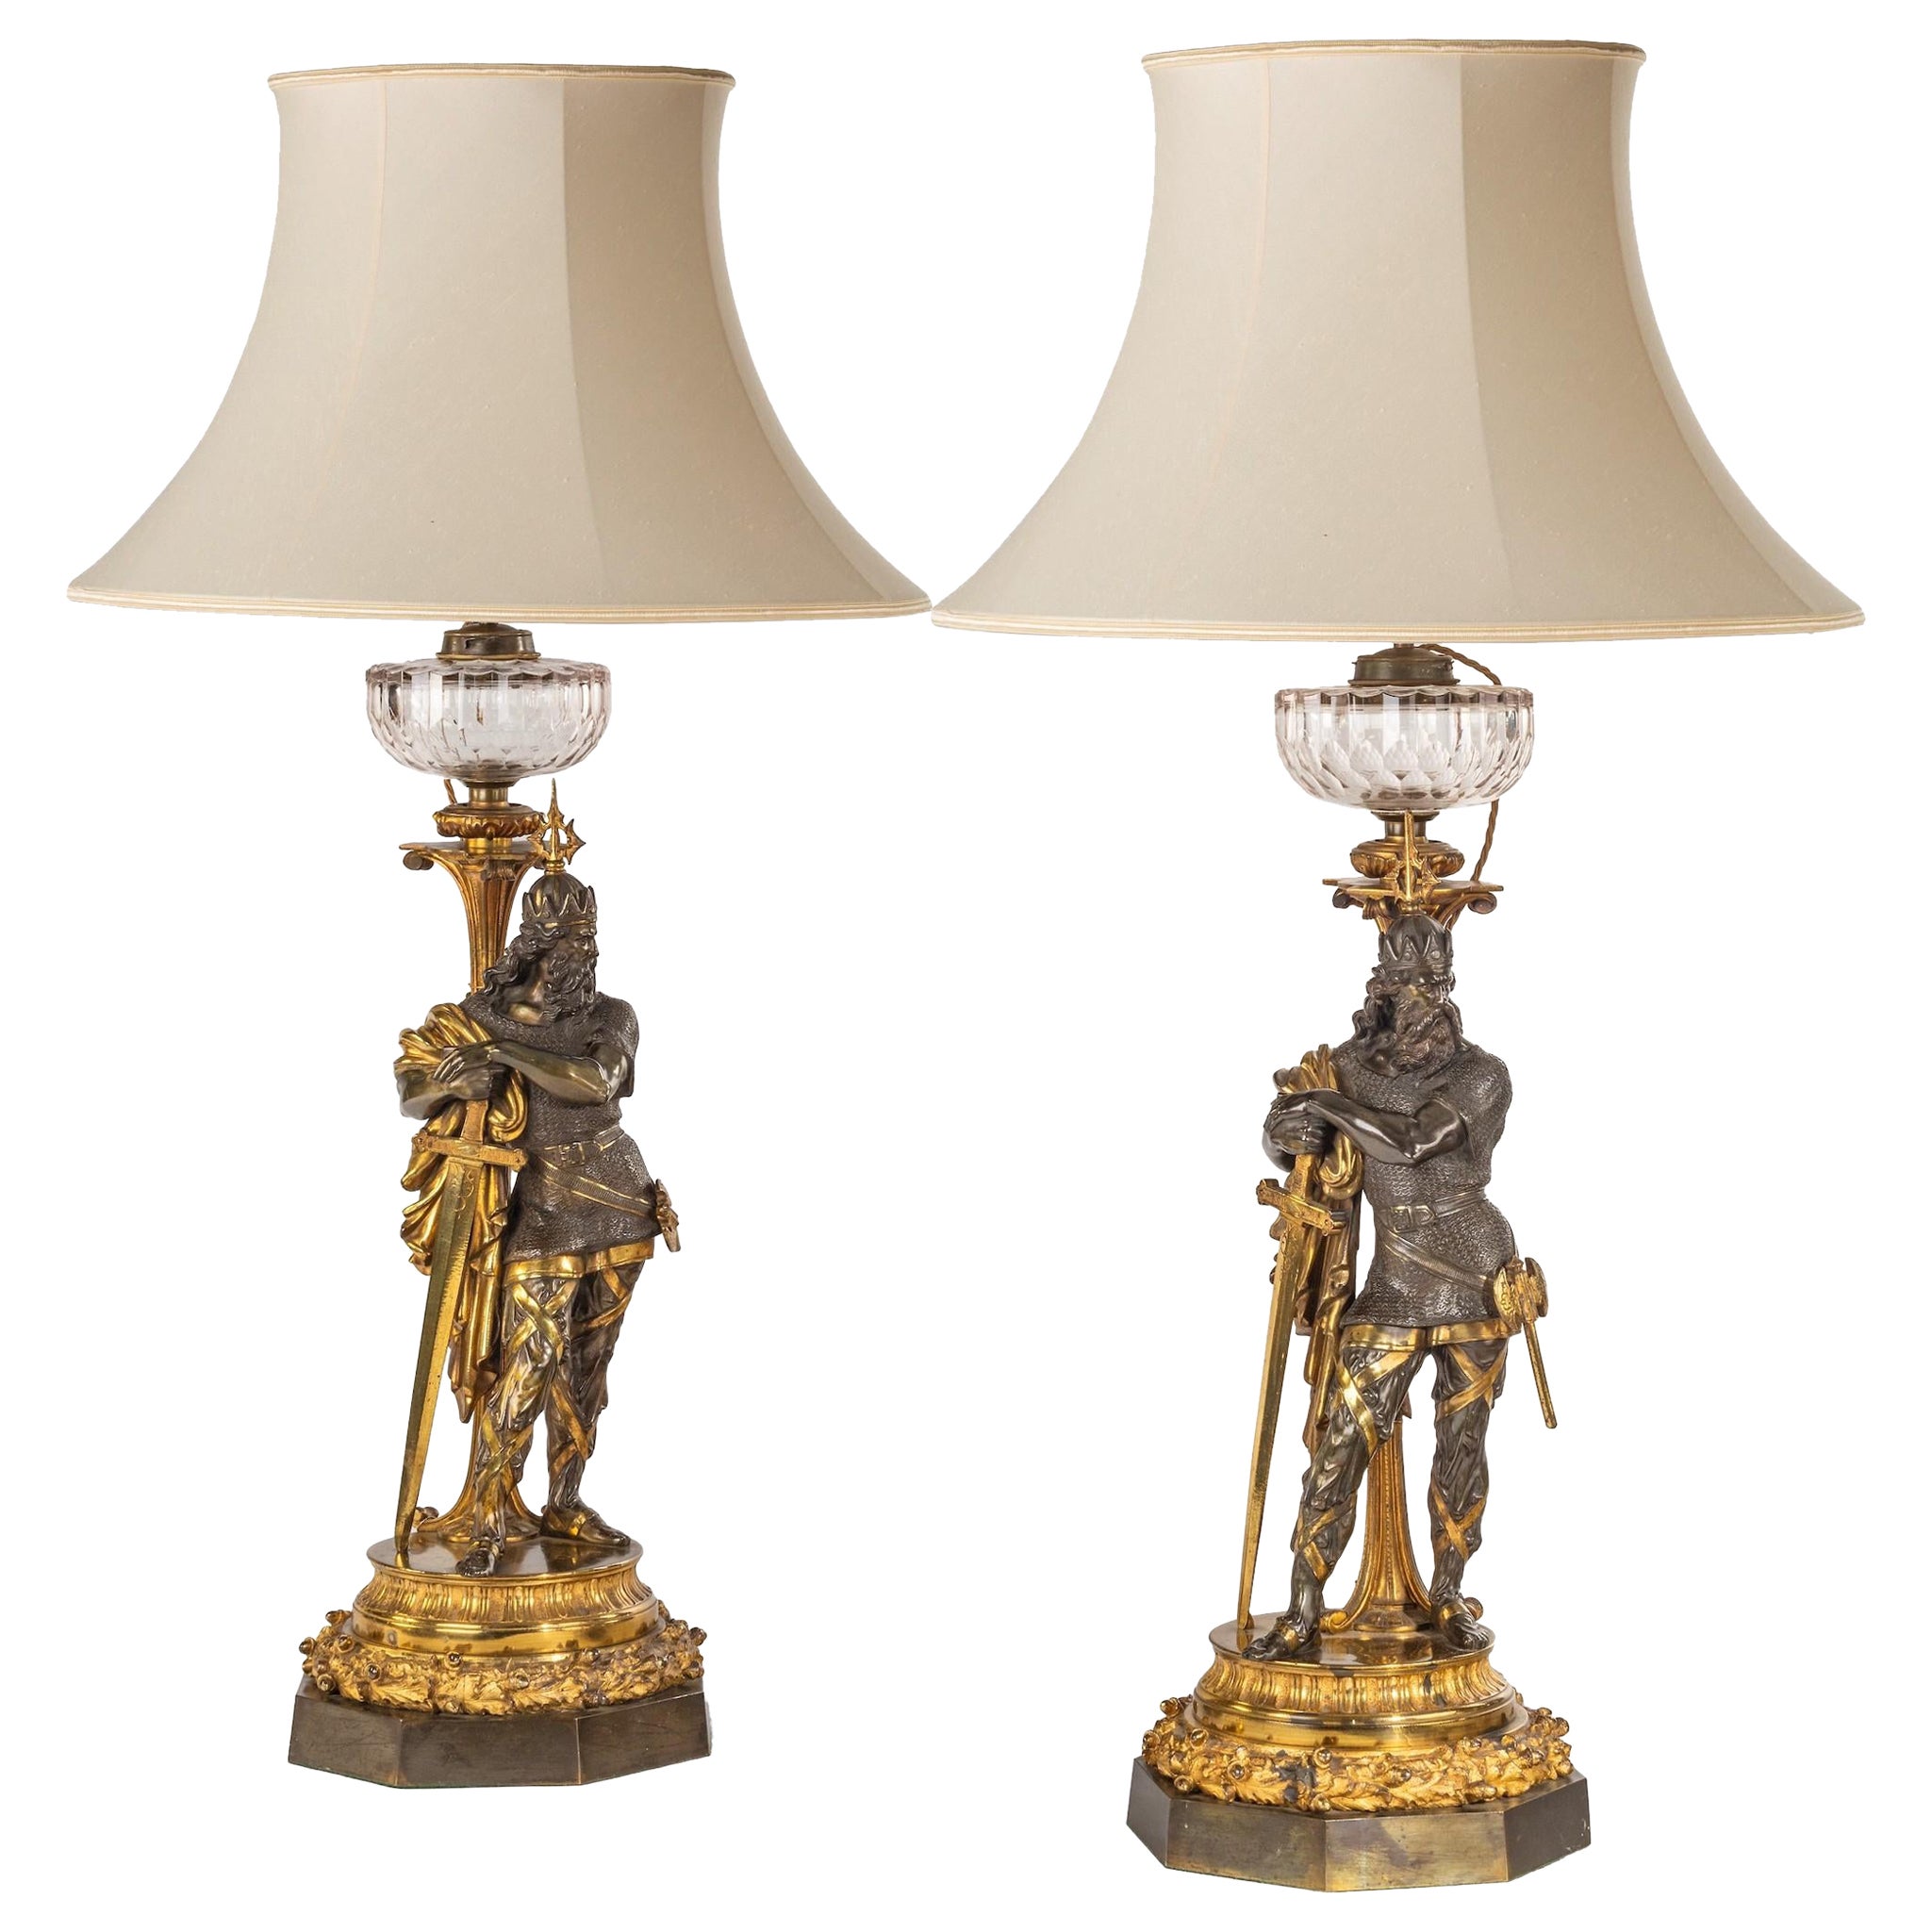 19th Century Pair of Bronze Lamps Designed as Medieval Knights